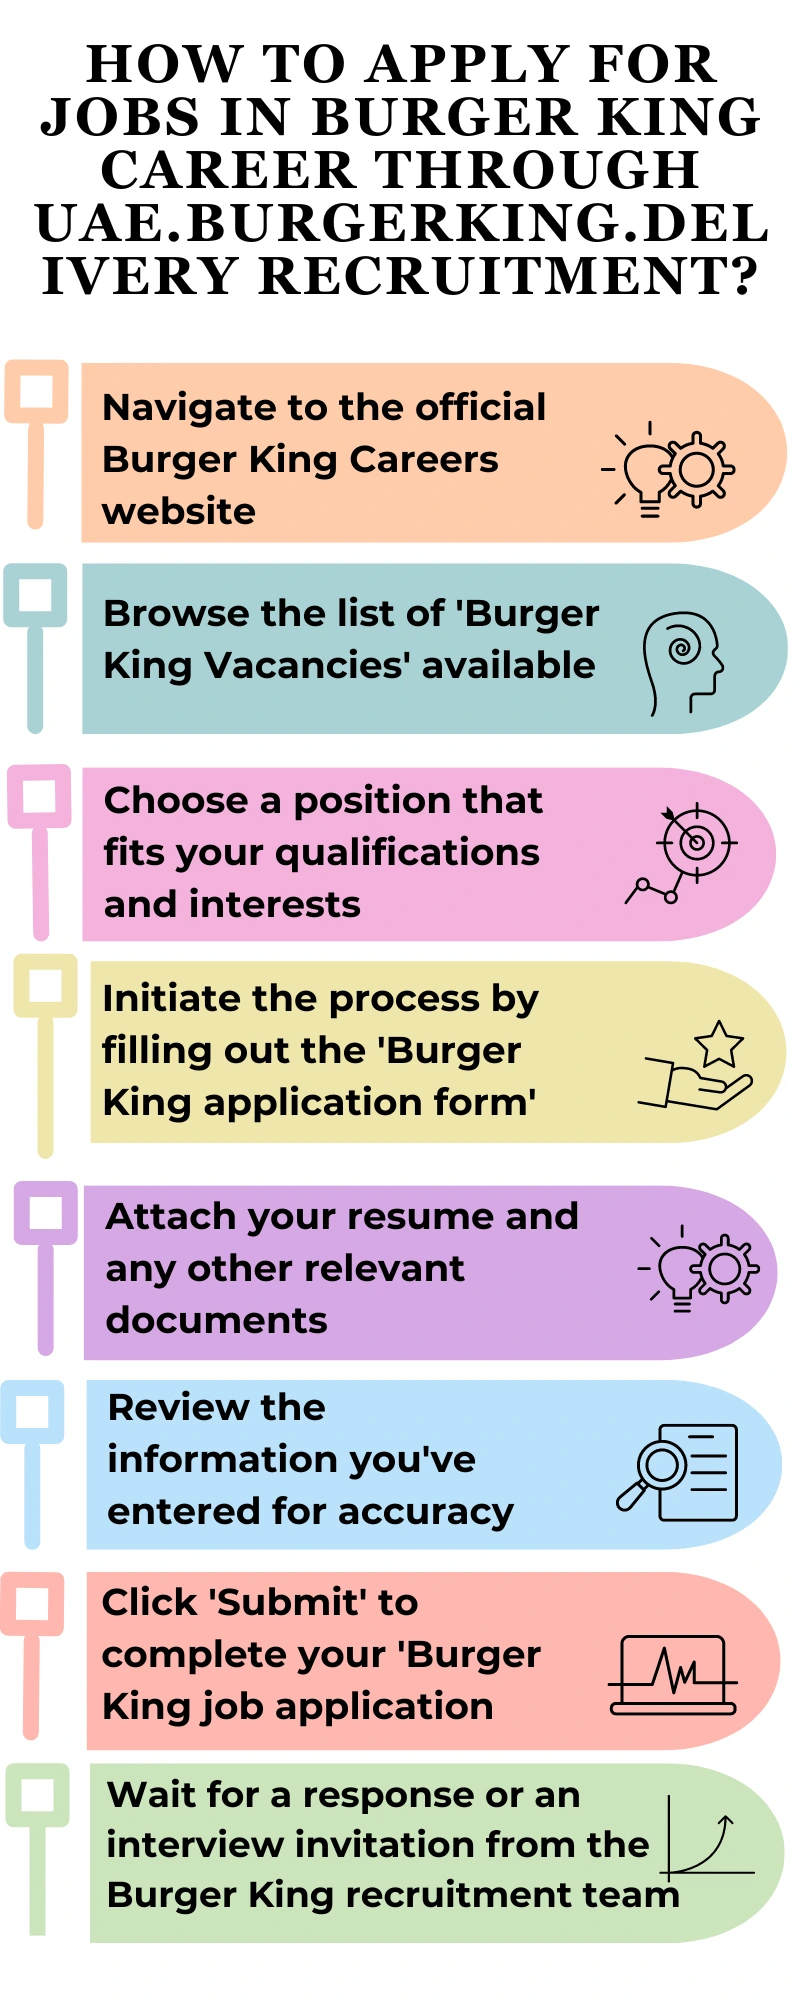 How to Apply for Jobs in Burger King Career through uae.burgerking.delivery recruitment?